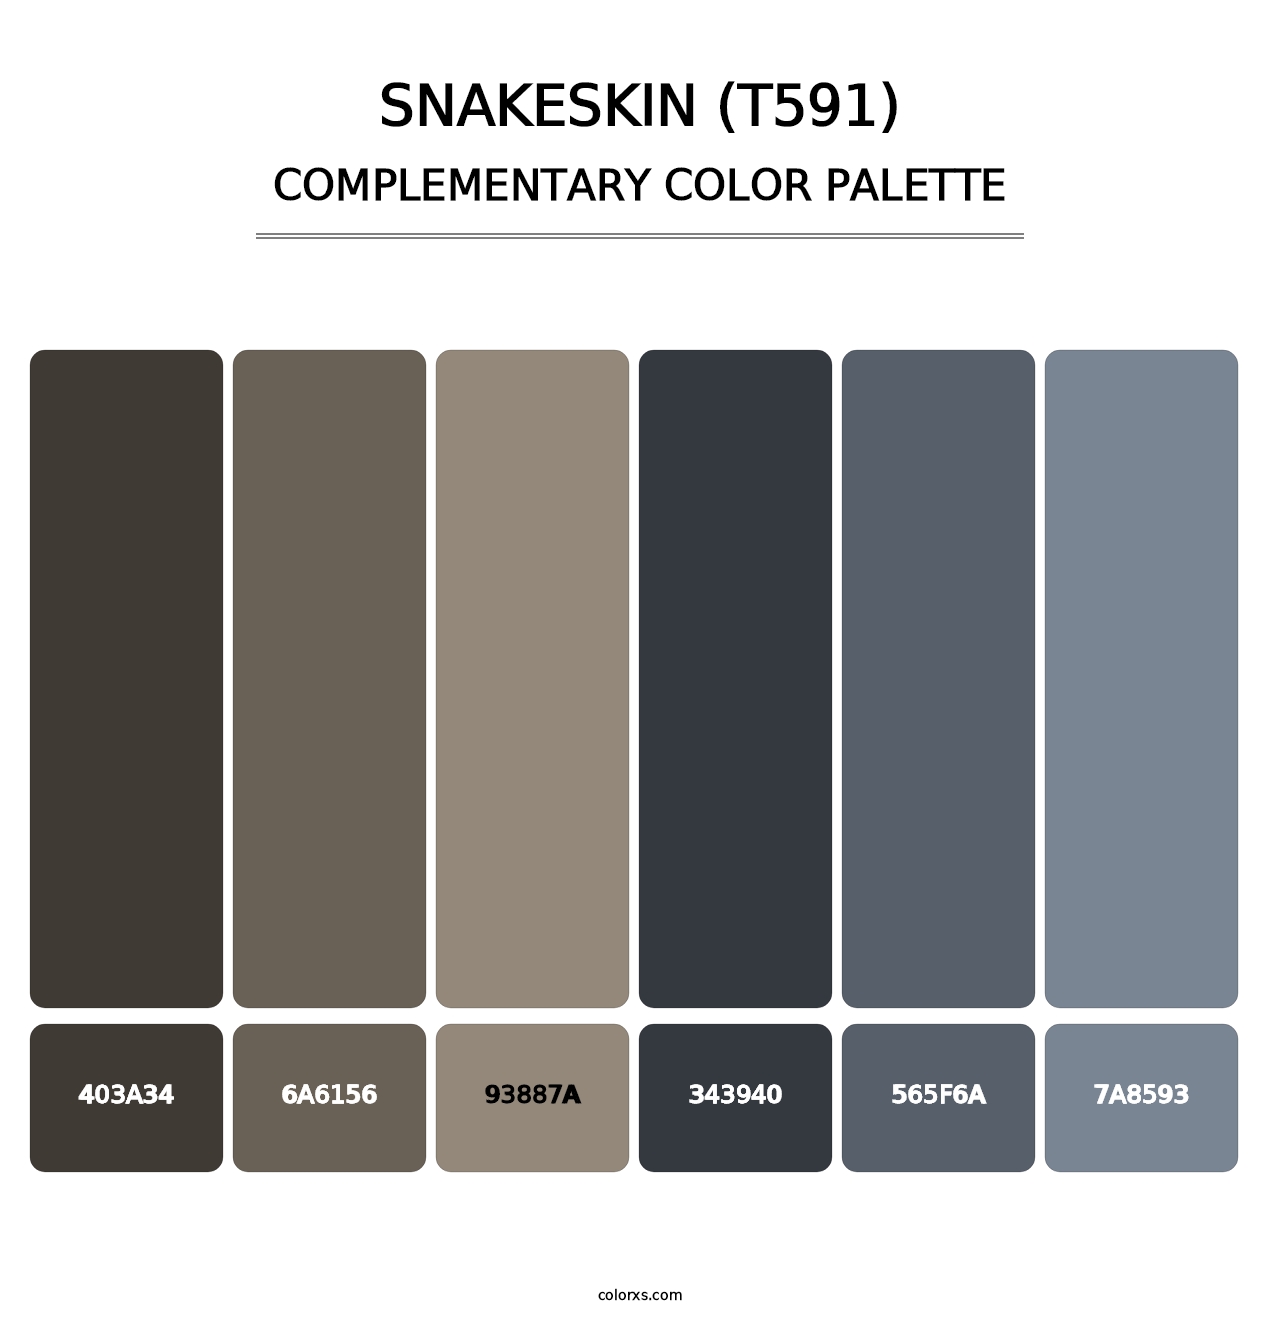 Snakeskin (T591) - Complementary Color Palette